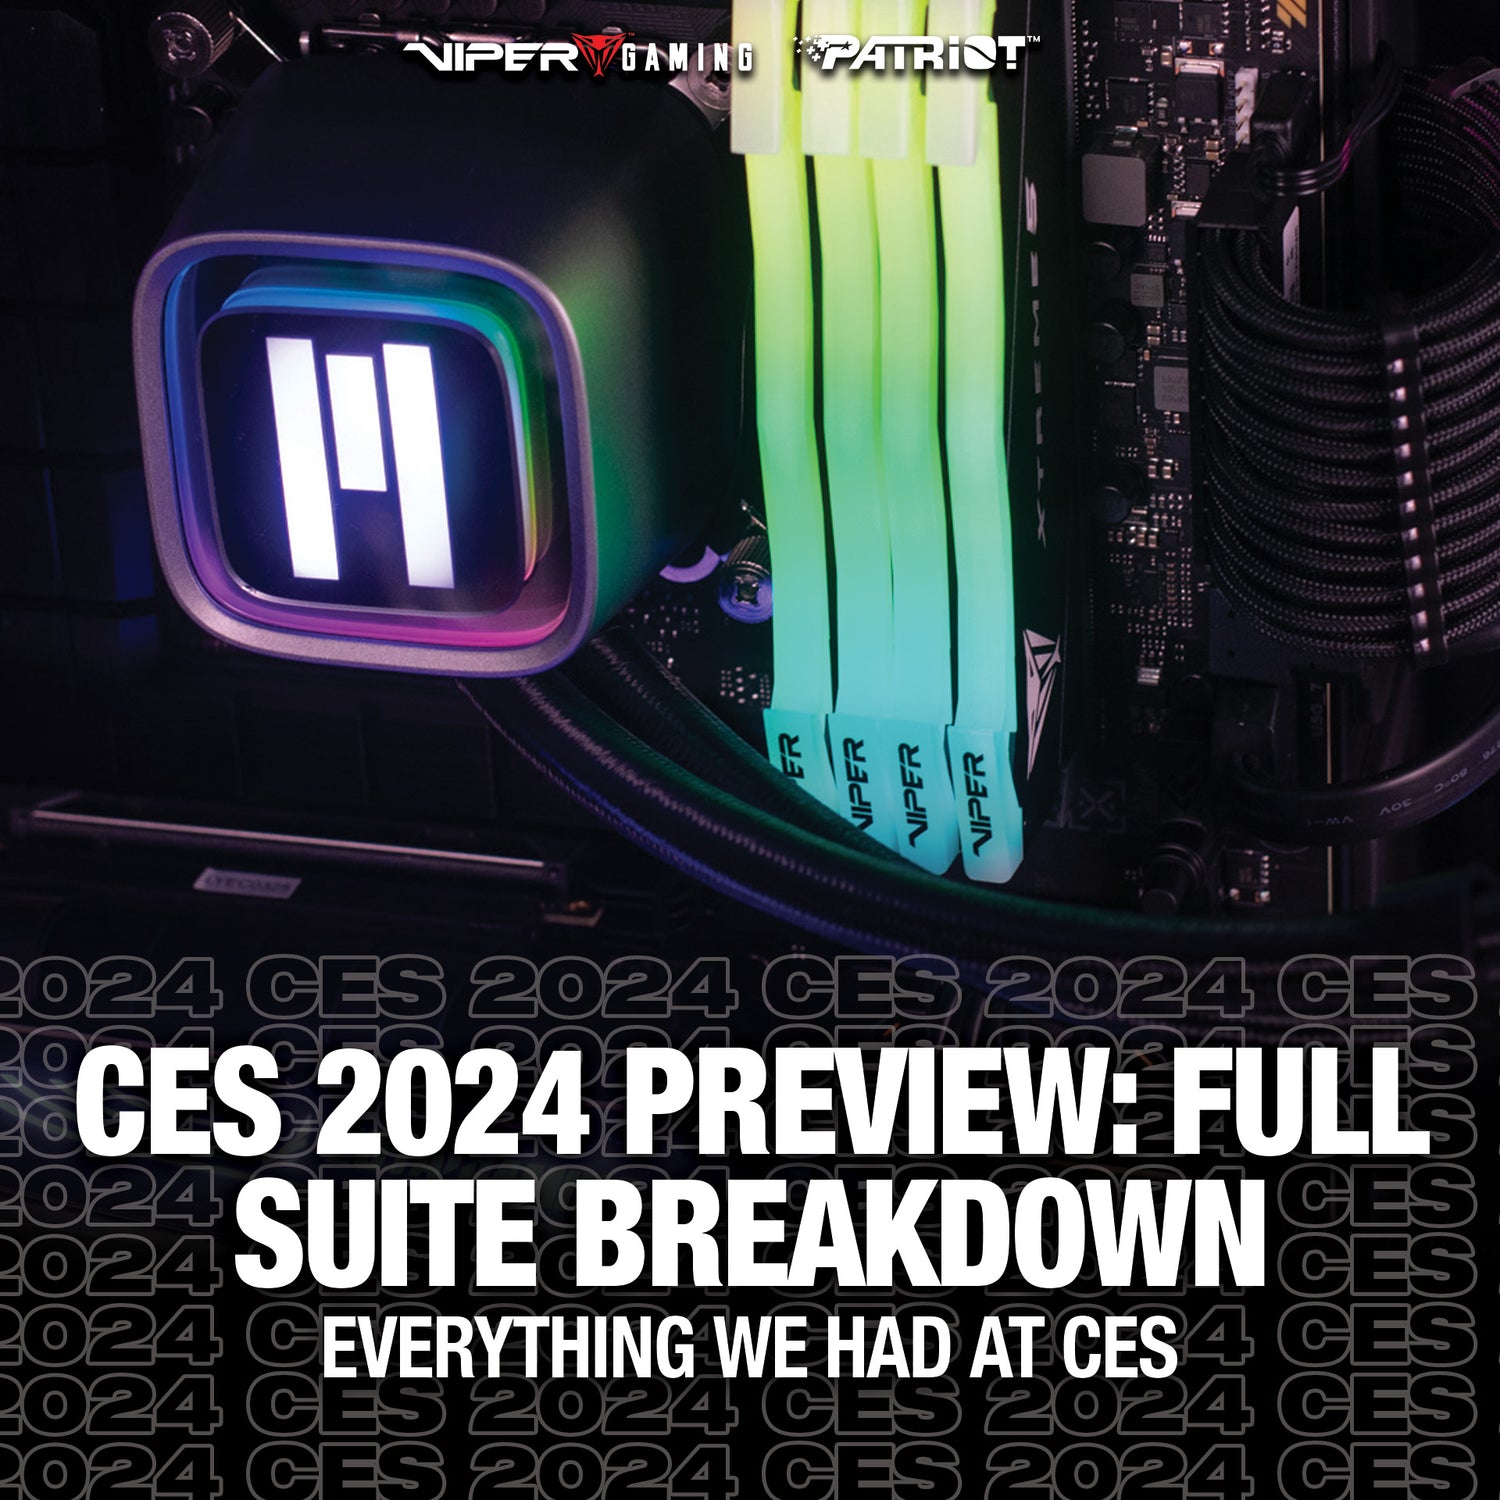 CES 2024 Preview: Full Suite Breakdown, Custom Systems and More